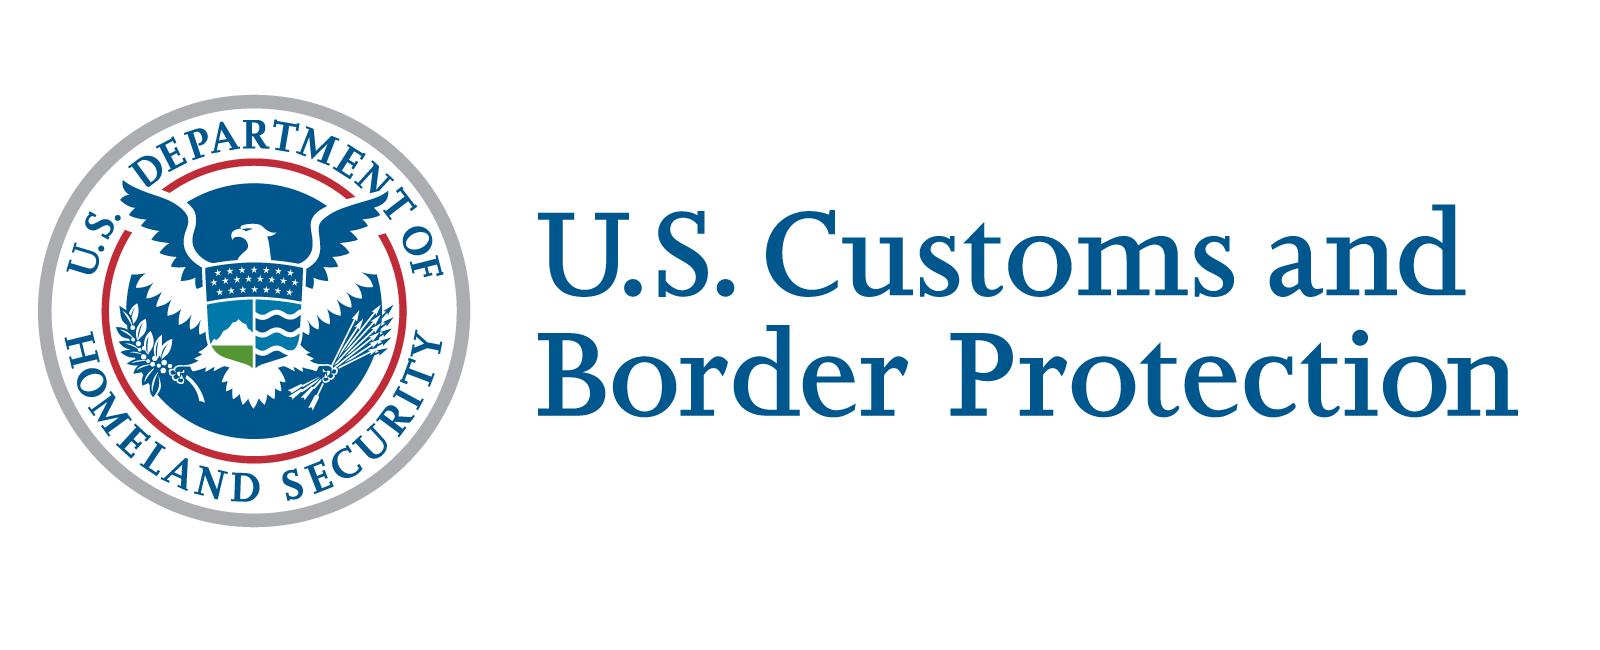 Customs and Border Patrol Logo - 18F: Digital service delivery. How the U.S. Customs and Border